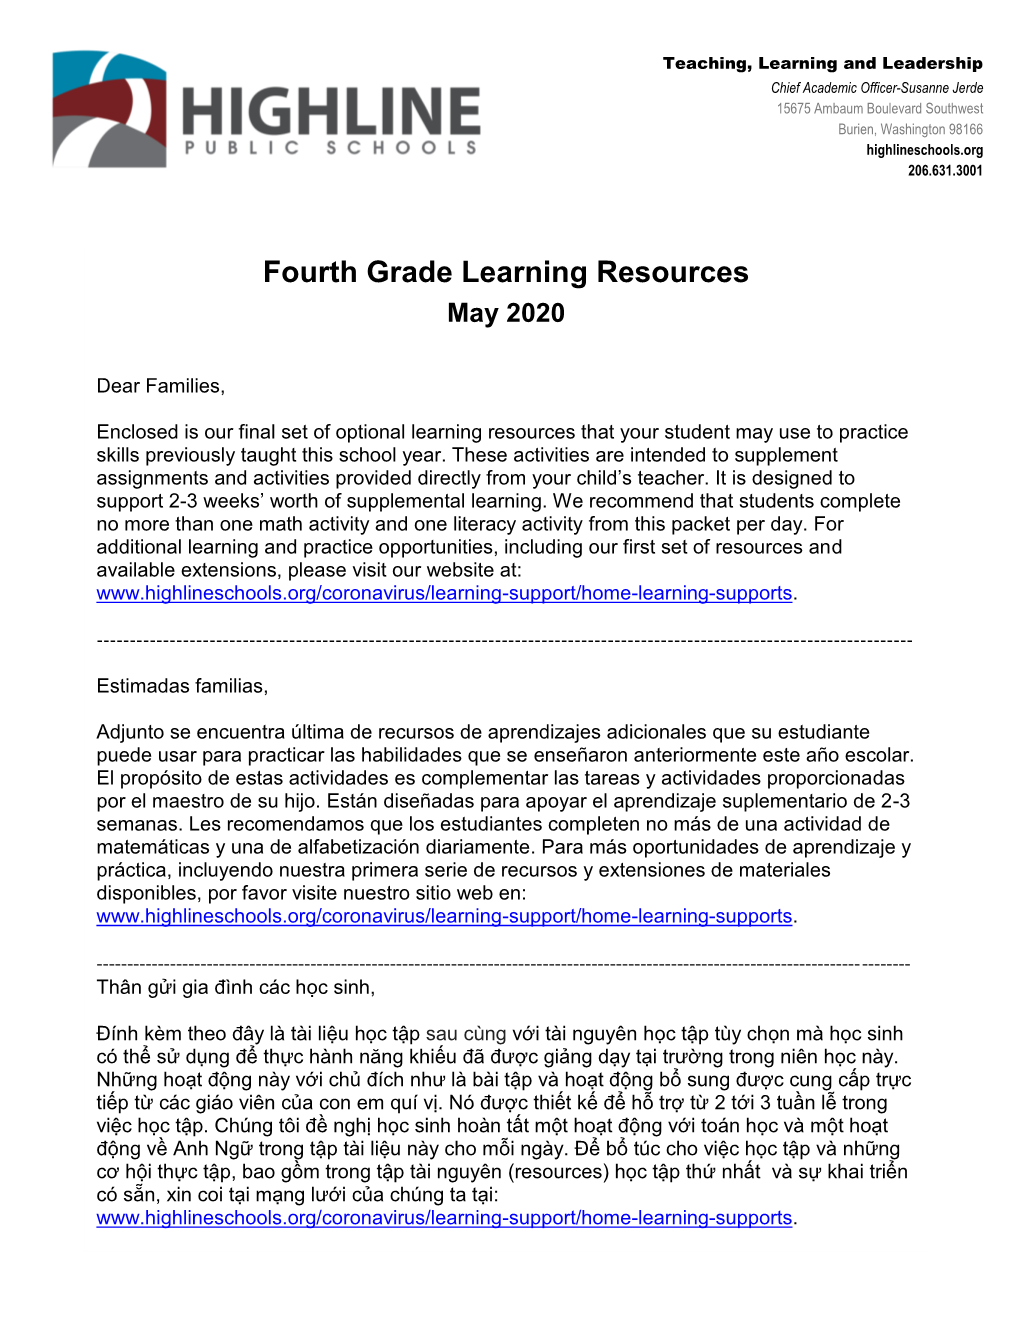 Fourth Grade Learning Resources May 2020